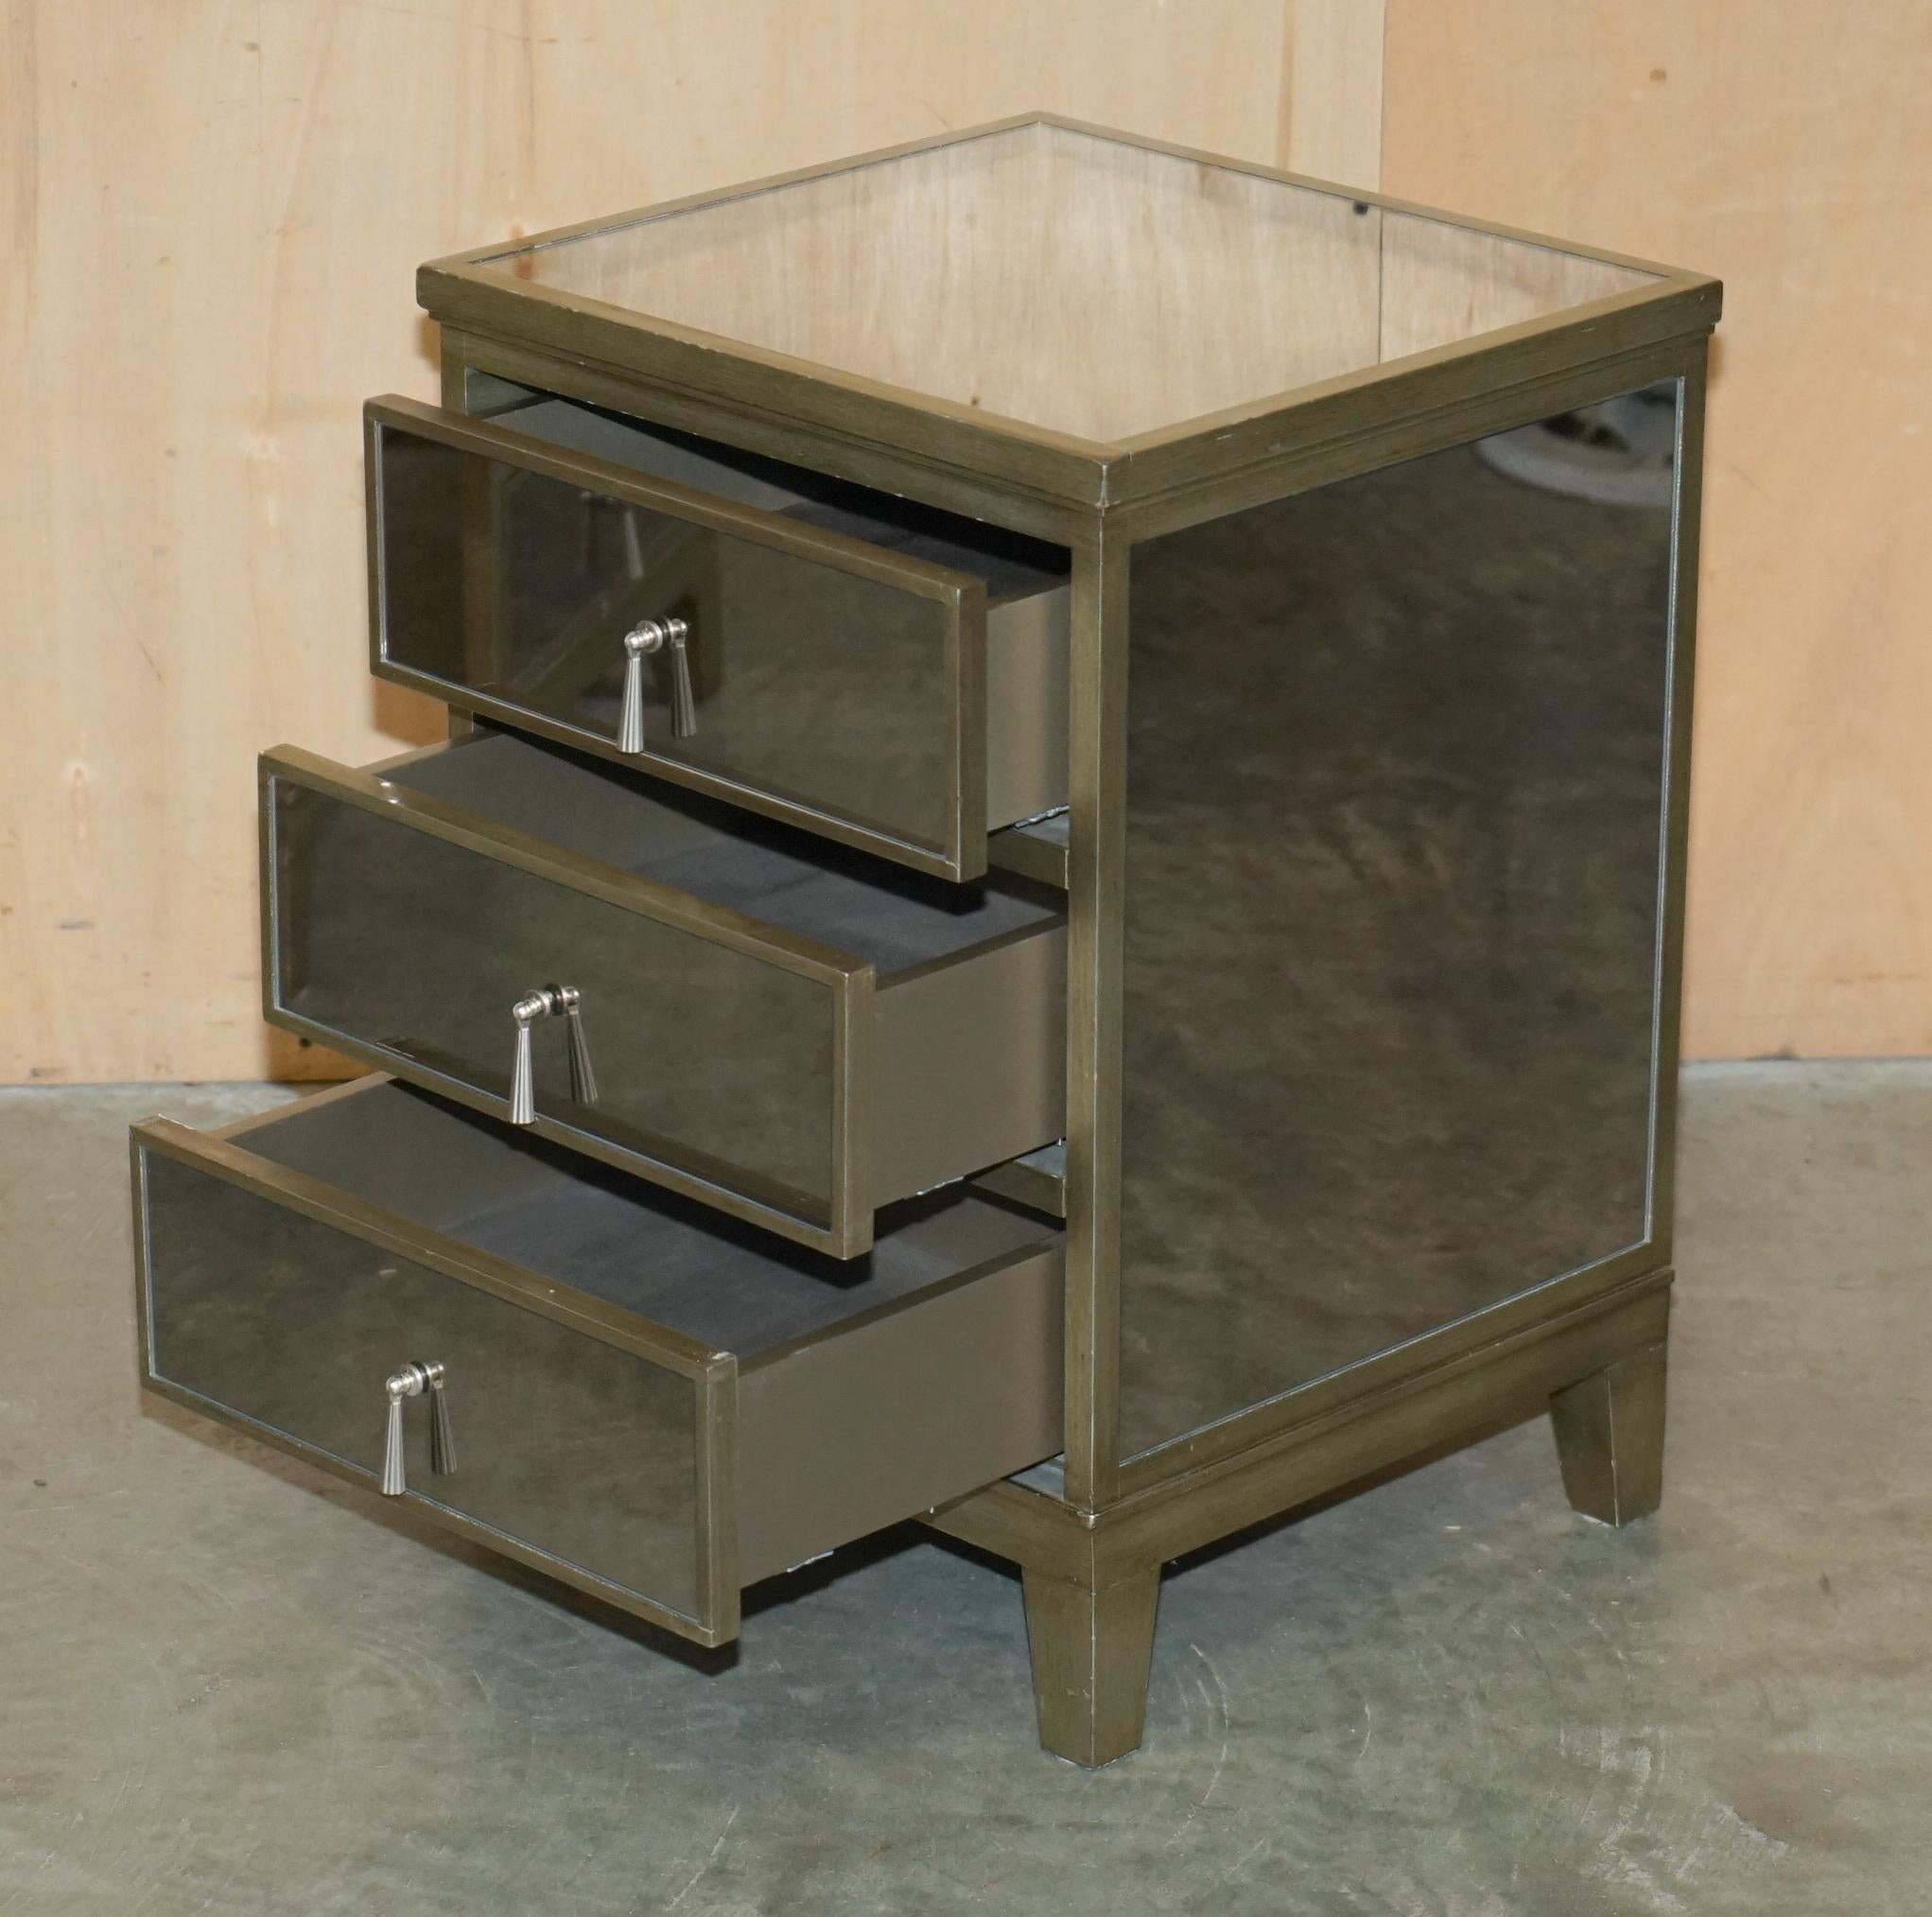 PAIR OF FEATHER & BLACK GATSBY MiRRORED BEDSIDE TABLES MATCHING DRAWERS AVAILABL 4